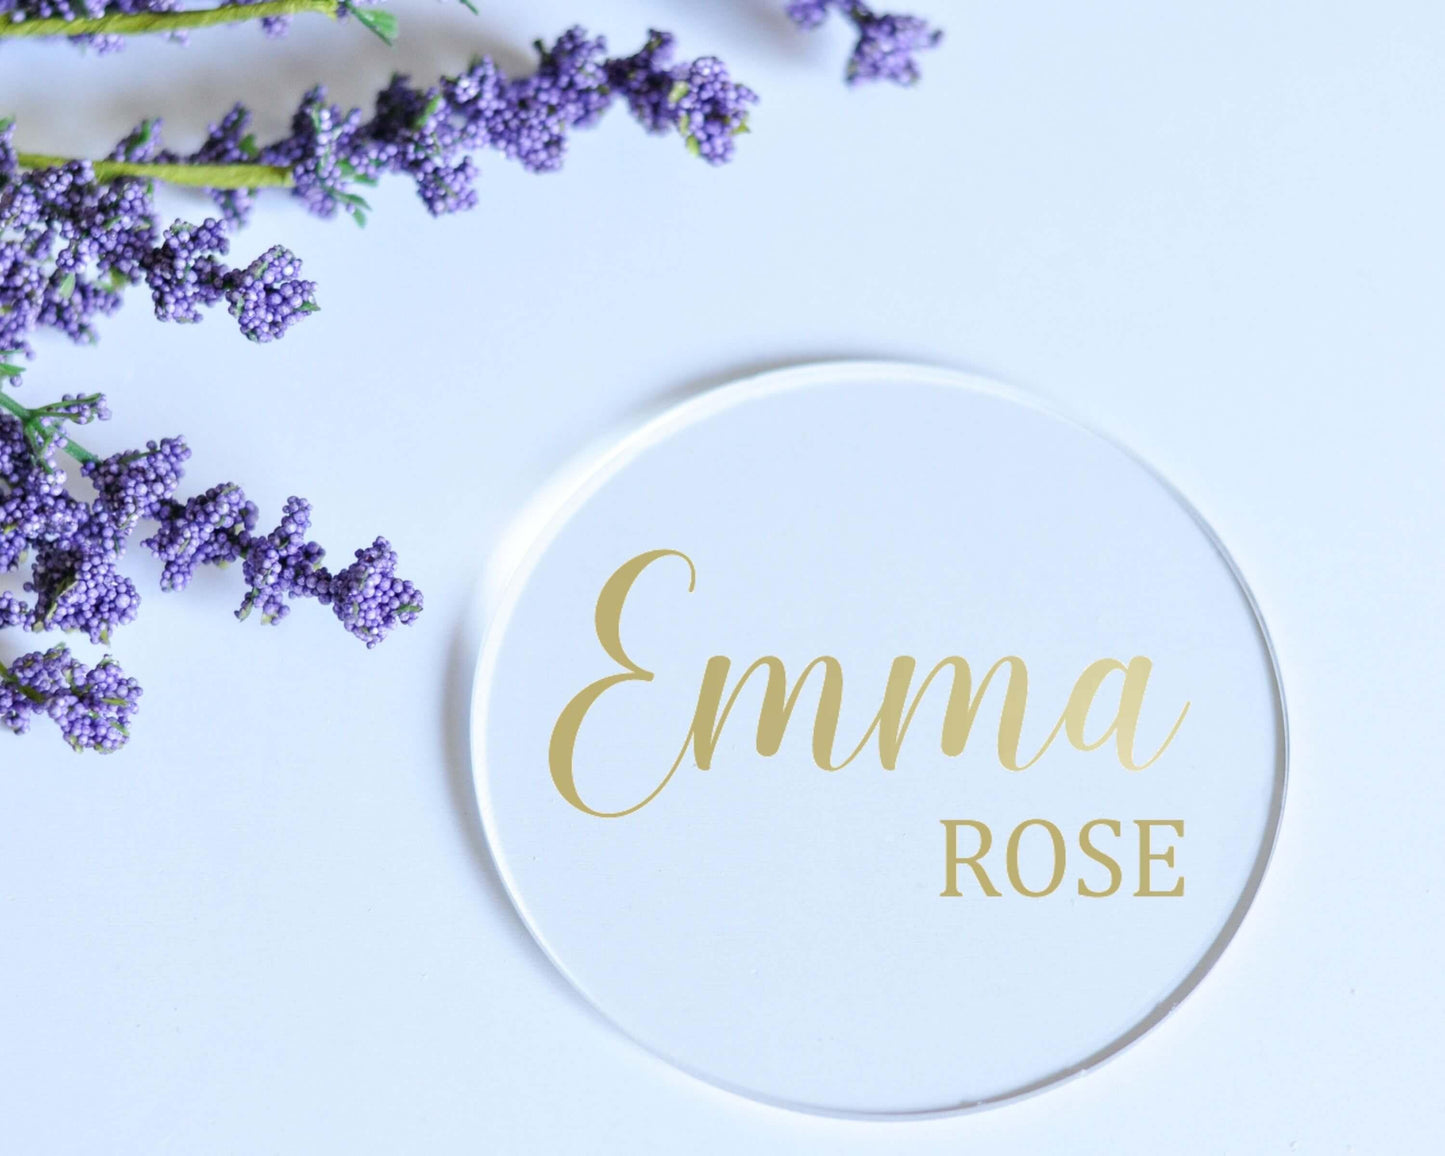 Baby Name Announcement Sign - Plaque | Personalized Birth Announcement - Crystal Rose Design Co.